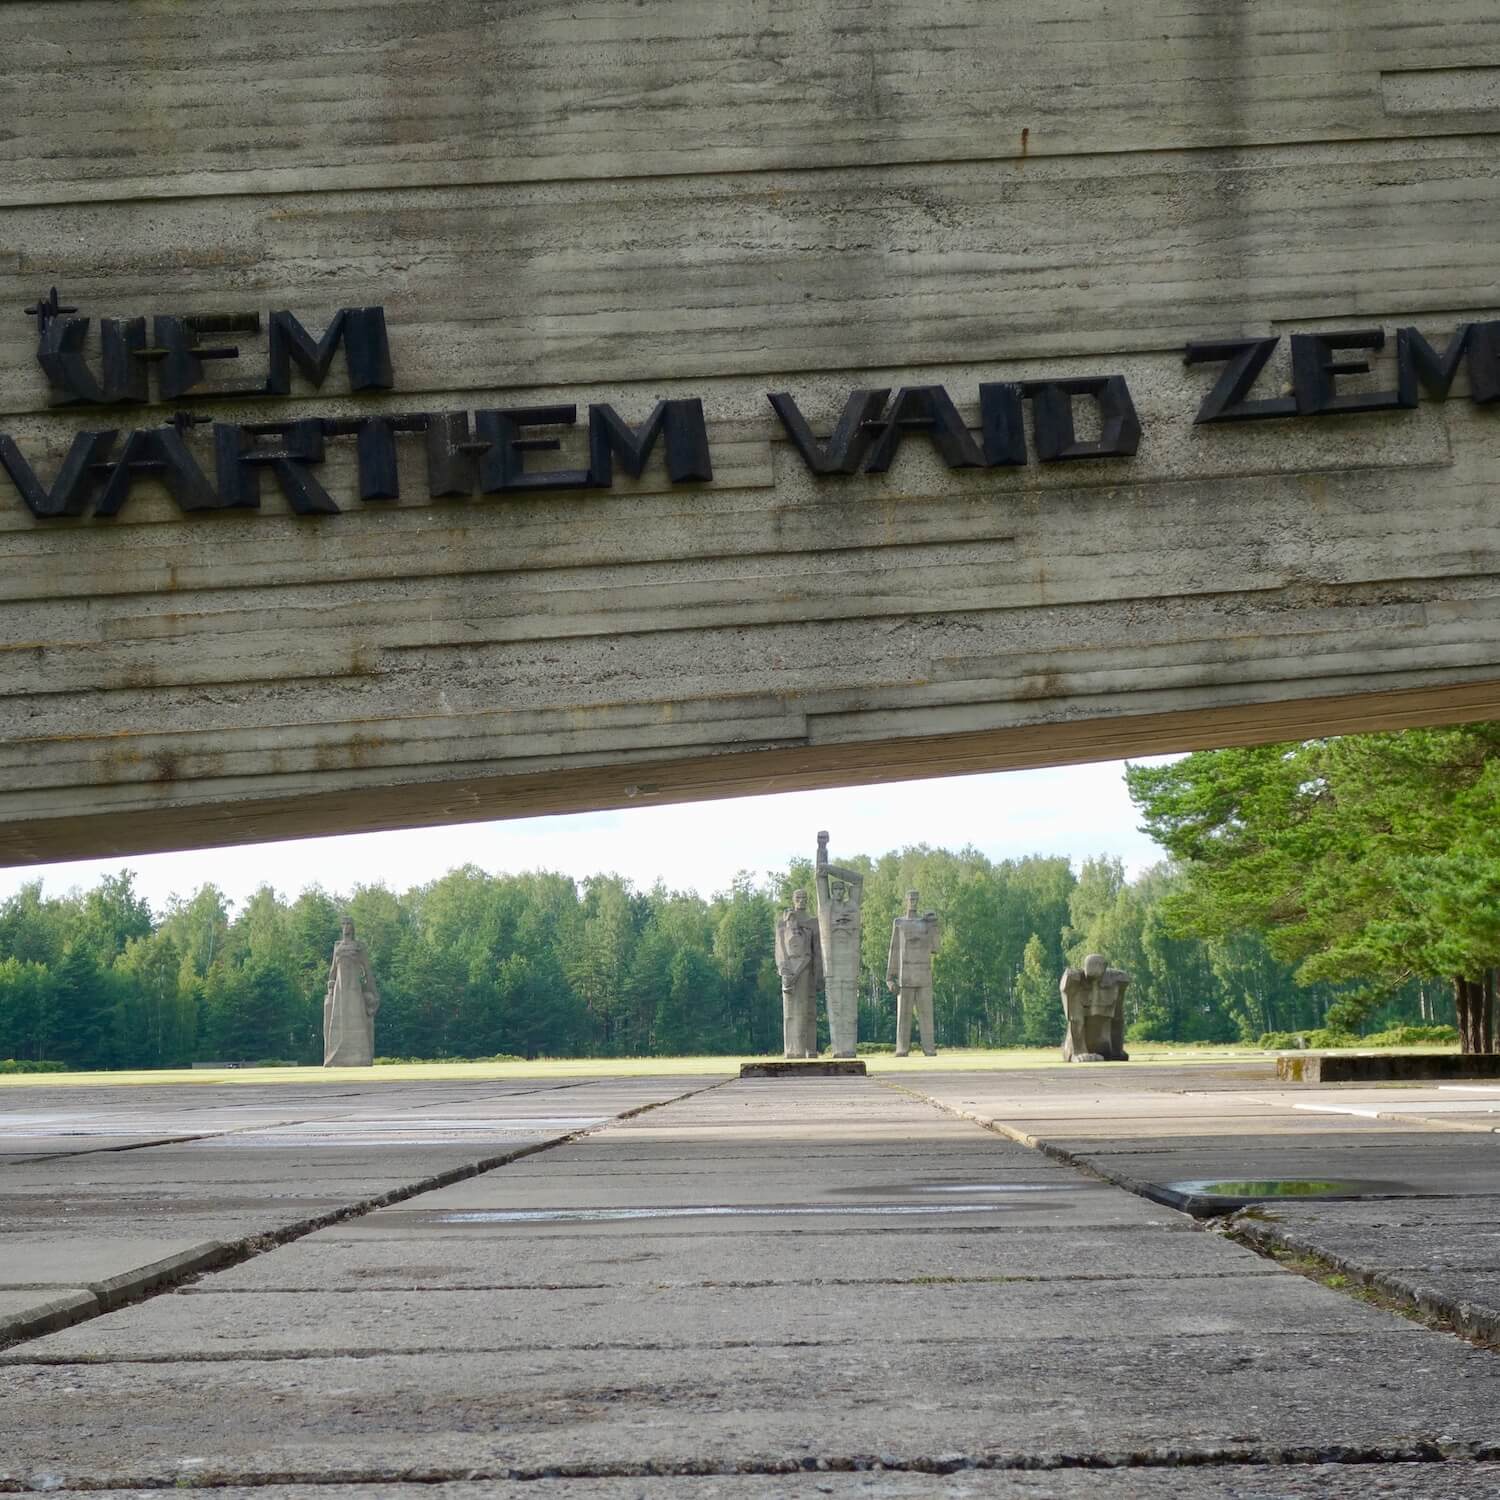 After WWII the soviets erected this monument to the Nazi work/death camp that existed on this land, which is about 15 miles outside Riga, Latvia. Most of the jewish population of Lithuania and Latvia were killed in WWII.